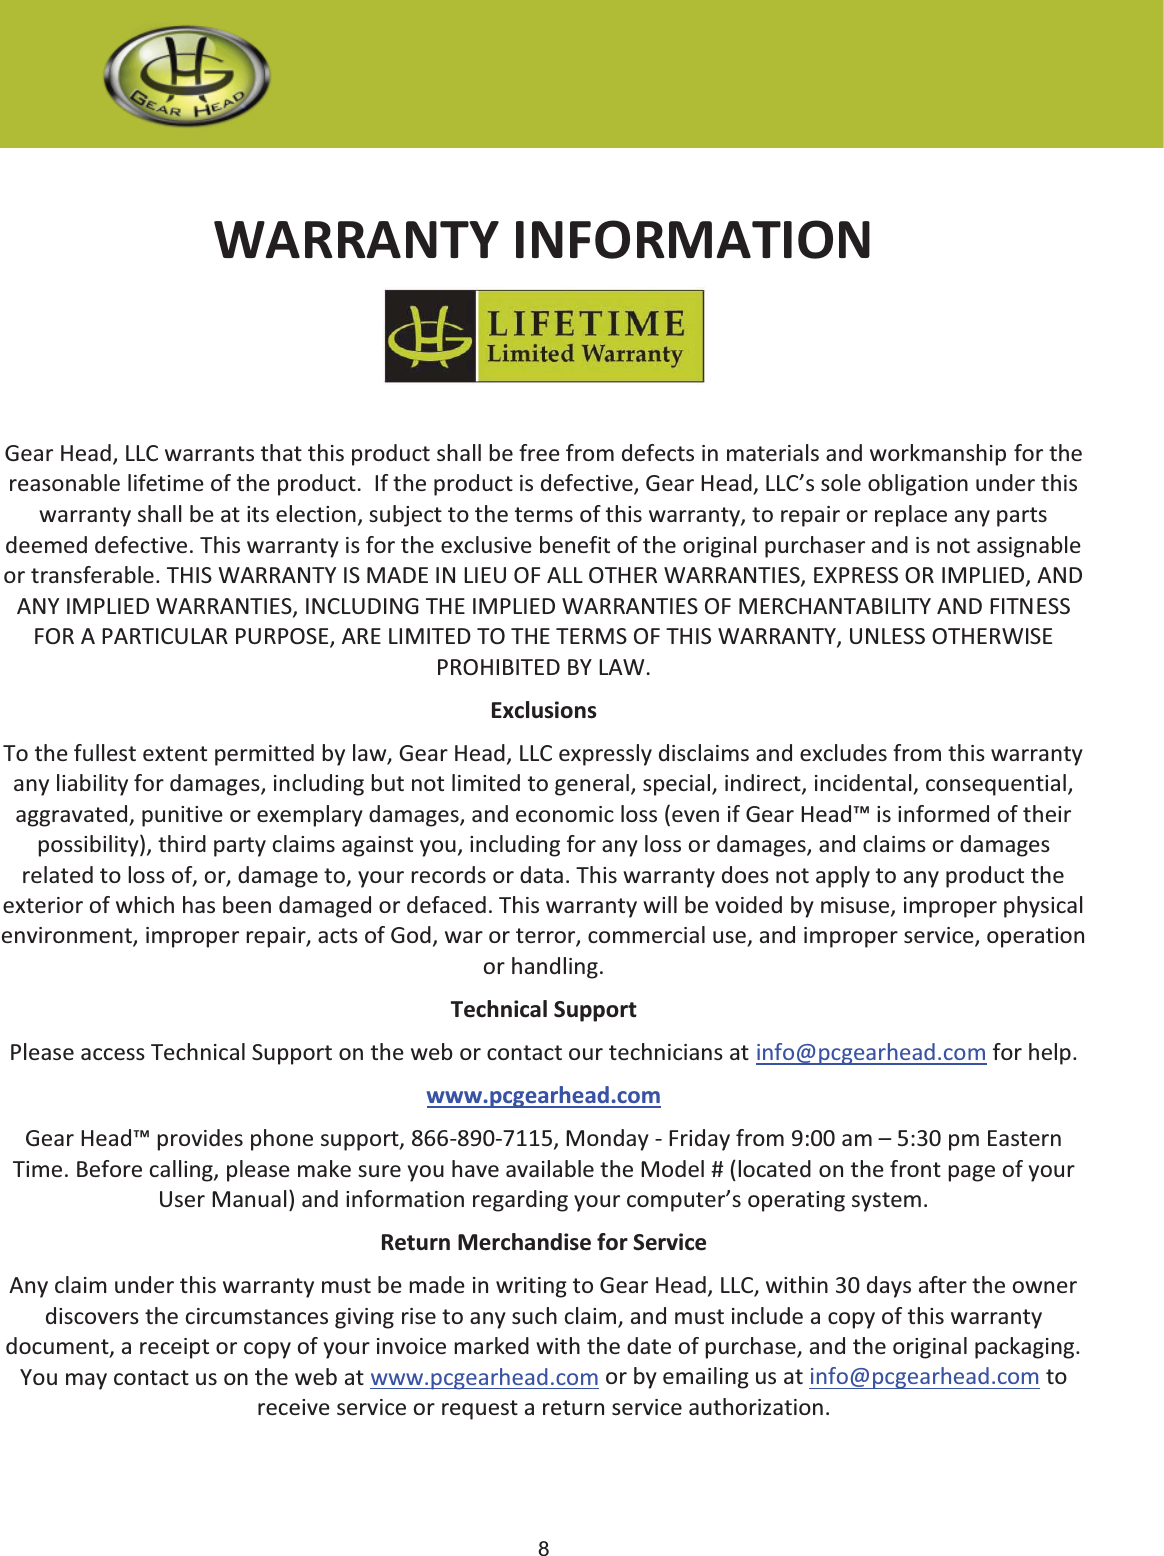 8 WARRANTY INFORMATION Gear Head, LLC warrants that this product shall be free from defects in materials and workmanship for the reasonable lifetime of the product.  If the product is defective, Gear Head, LLC’s sole obligation under this warranty shall be at its election, subject to the terms of this warranty, to repair or replace any parts deemed defective. This warranty is for the exclusive benefit of the original purchaser and is not assignable or transferable. THIS WARRANTY IS MADE IN LIEU OF ALL OTHER WARRANTIES, EXPRESS OR IMPLIED, AND ANY IMPLIED WARRANTIES, INCLUDING THE IMPLIED WARRANTIES OF MERCHANTABILITY AND FITNESS FOR A PARTICULAR PURPOSE, ARE LIMITED TO THE TERMS OF THIS WARRANTY, UNLESS OTHERWISE PROHIBITED BY LAW. Exclusions To the fullest extent permitted by law, Gear Head, LLC expressly disclaims and excludes from this warranty any liability for damages, including but not limited to general, special, indirect, incidental, consequential, aggravated, punitive or exemplary damages, and economic loss (even if Gear Head™ is informed of their possibility), third party claims against you, including for any loss or damages, and claims or damages related to loss of, or, damage to, your records or data. This warranty does not apply to any product the exterior of which has been damaged or defaced. This warranty will be voided by misuse, improper physical environment, improper repair, acts of God, war or terror, commercial use, and improper service, operation or handling. Technical Support Please access Technical Support on the web or contact our technicians at info@pcgearhead.com for help.   www.pcgearhead.com Gear Head™ provides phone support, 866-890-7115, Monday - Friday from 9:00 am – 5:30 pm Eastern Time. Before calling, please make sure you have available the Model # (located on the front page of your User Manual) and information regarding your computer’s operating system. Return Merchandise for Service Any claim under this warranty must be made in writing to Gear Head, LLC, within 30 days after the owner discovers the circumstances giving rise to any such claim, and must include a copy of this warranty document, a receipt or copy of your invoice marked with the date of purchase, and the original packaging. You may contact us on the web at www.pcgearhead.com or by emailing us at info@pcgearhead.com to receive service or request a return service authorization. 